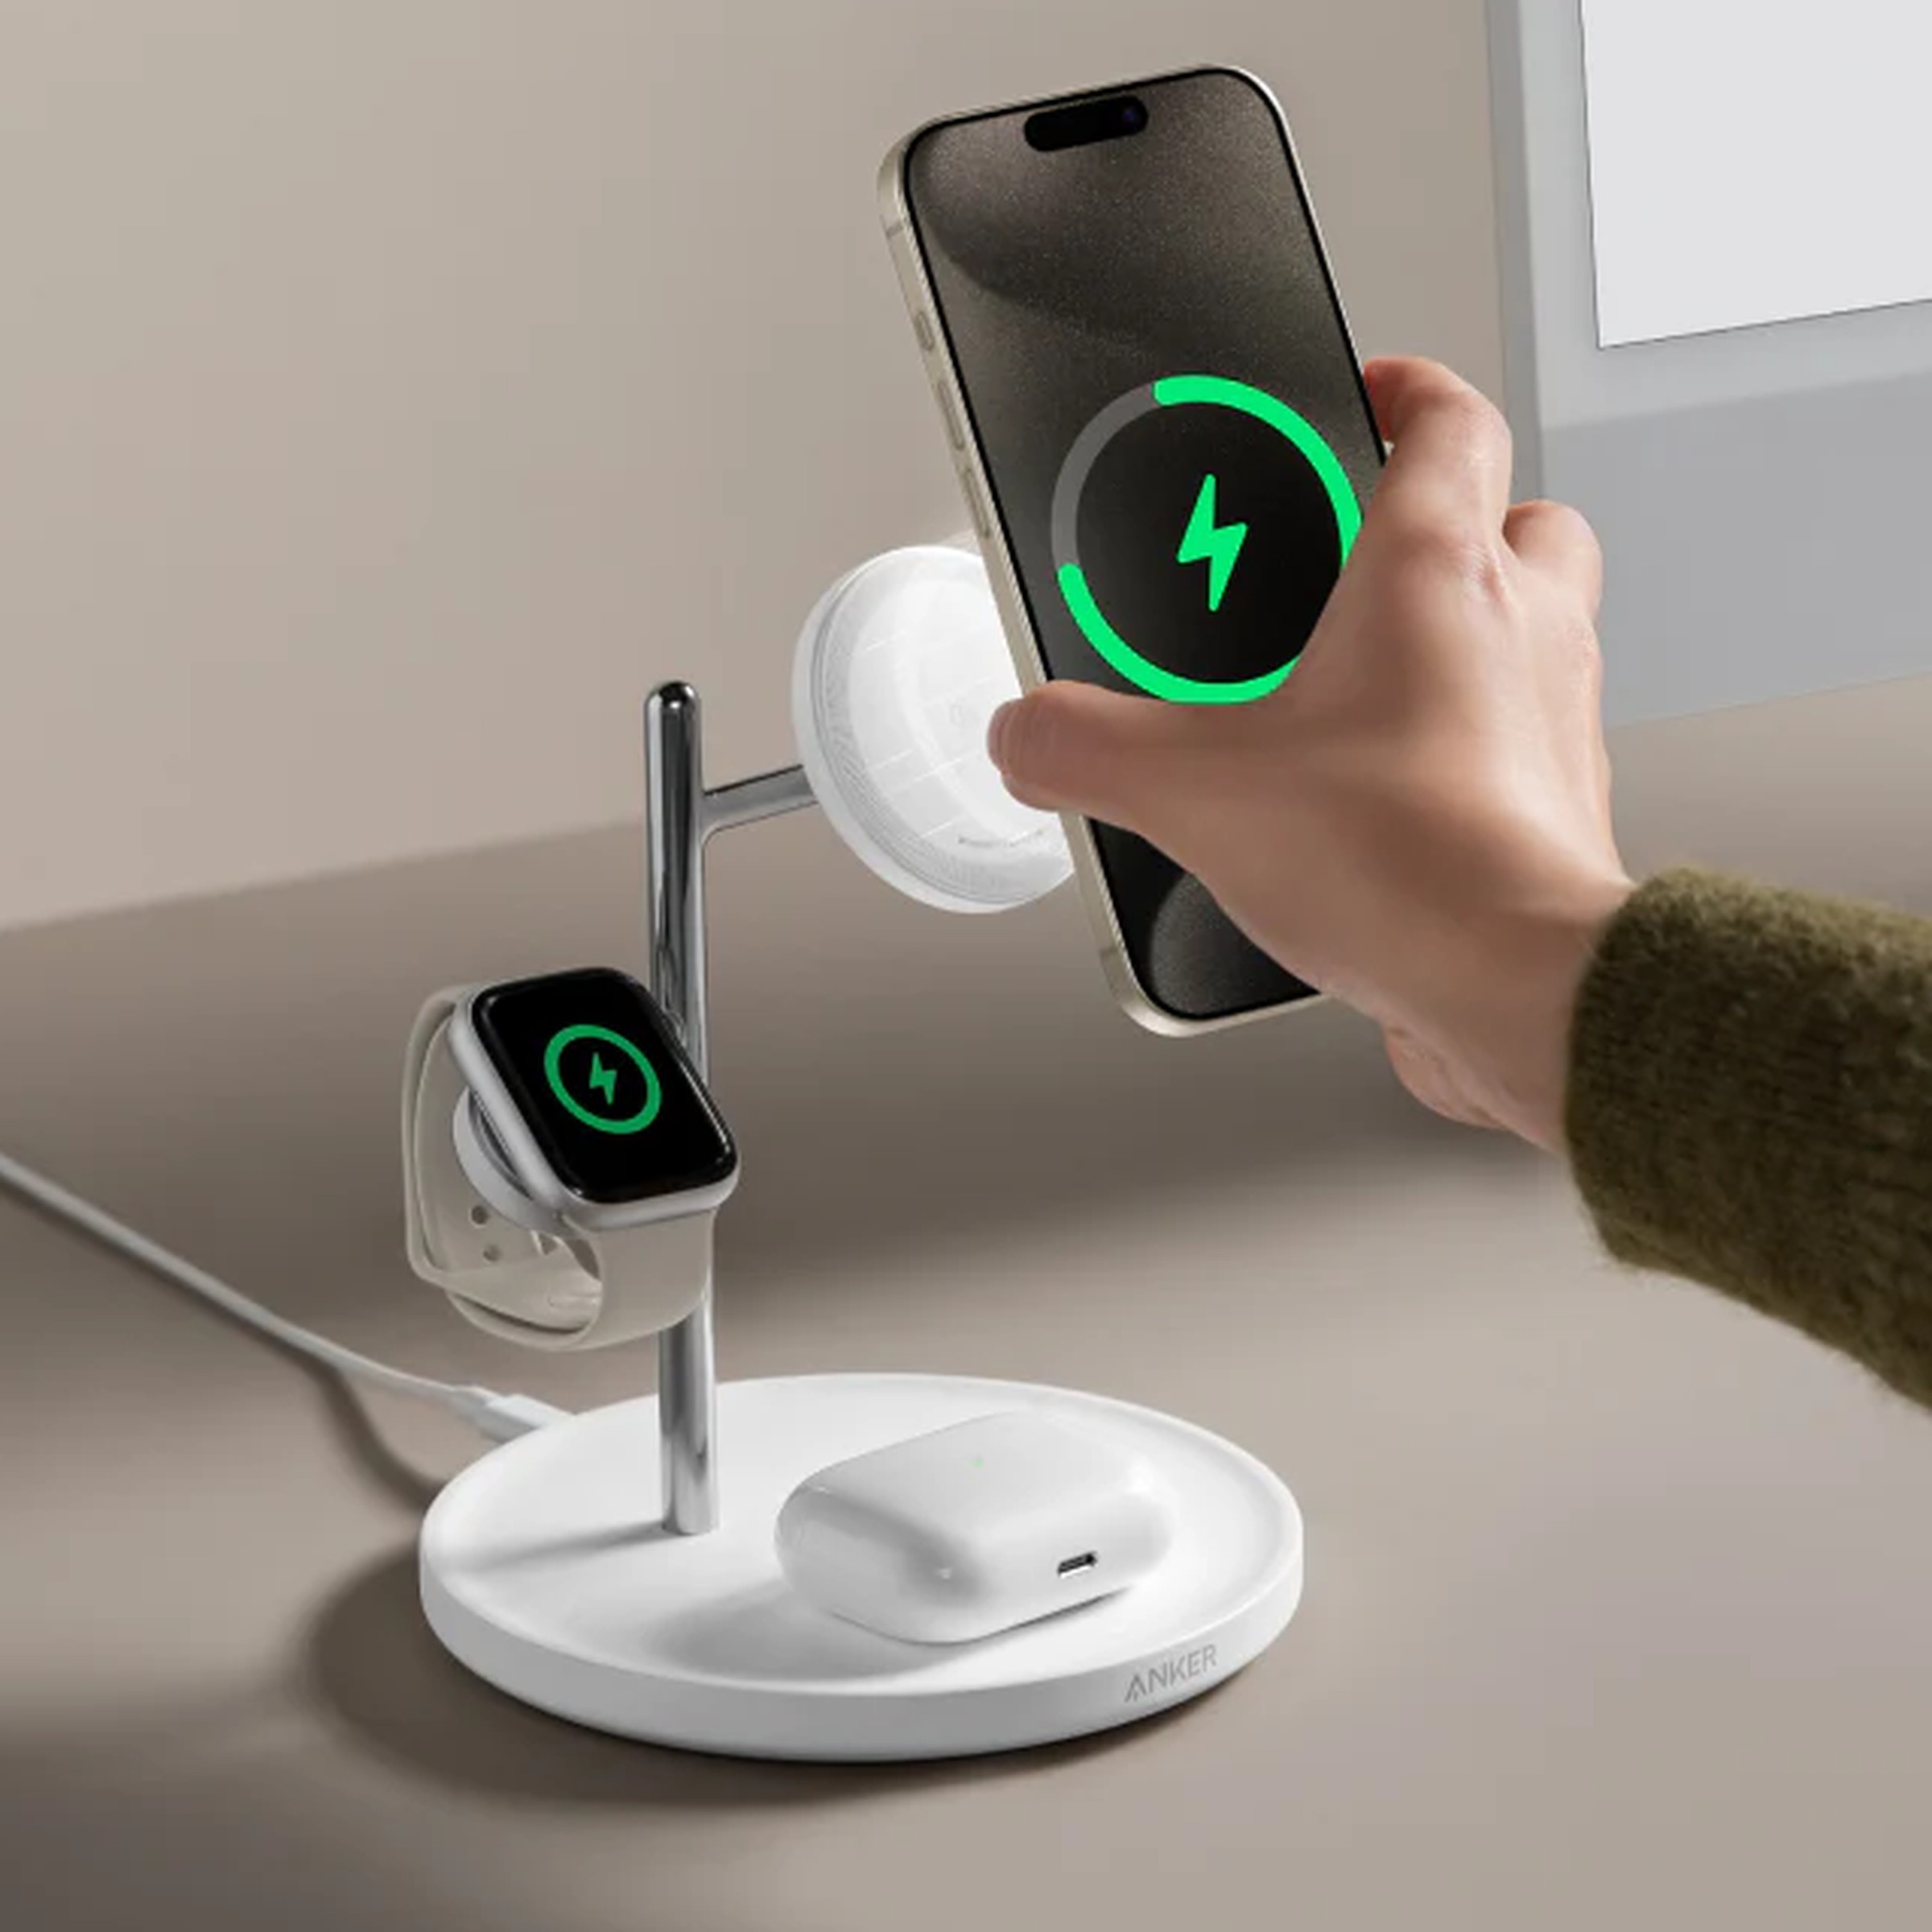 Someone placing an iPhone onto an Anker charging stand